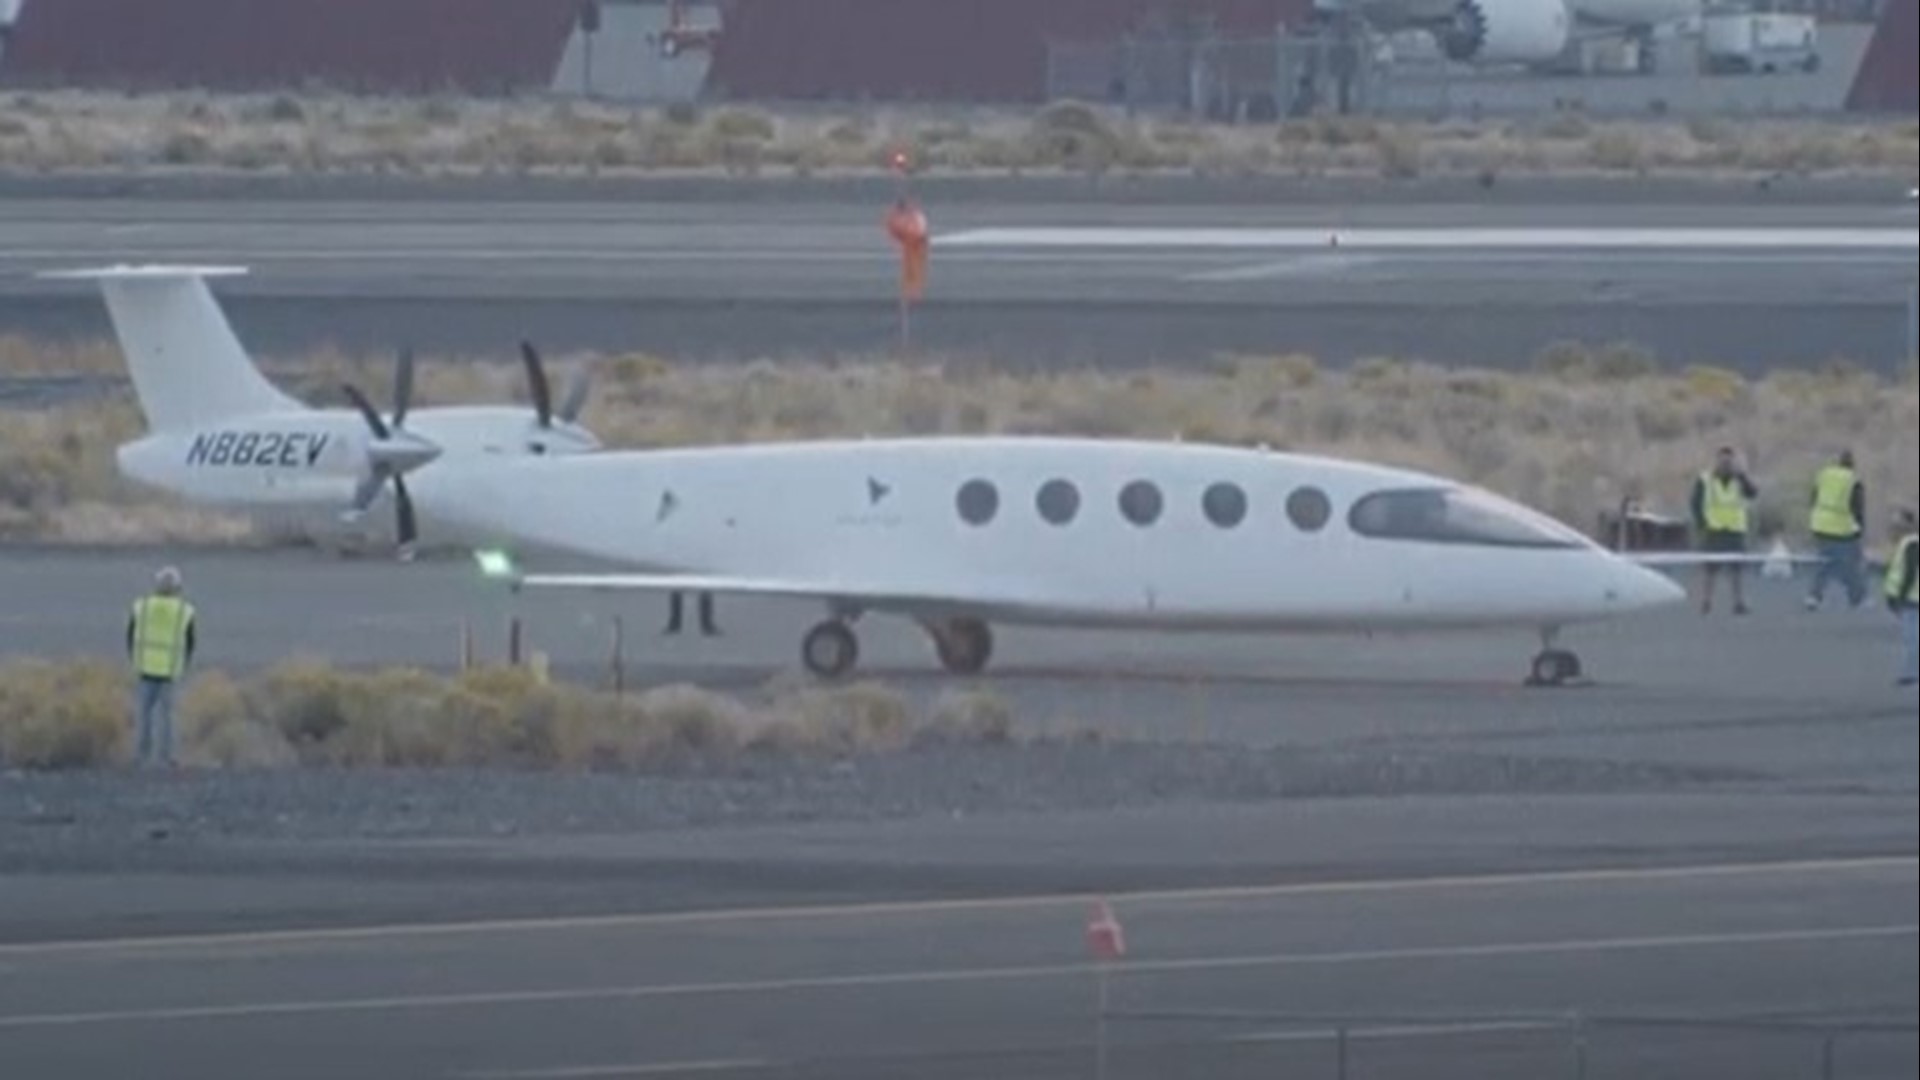 A prototype, all-electric airplane took its first flight Tuesday morning in central Washington state.